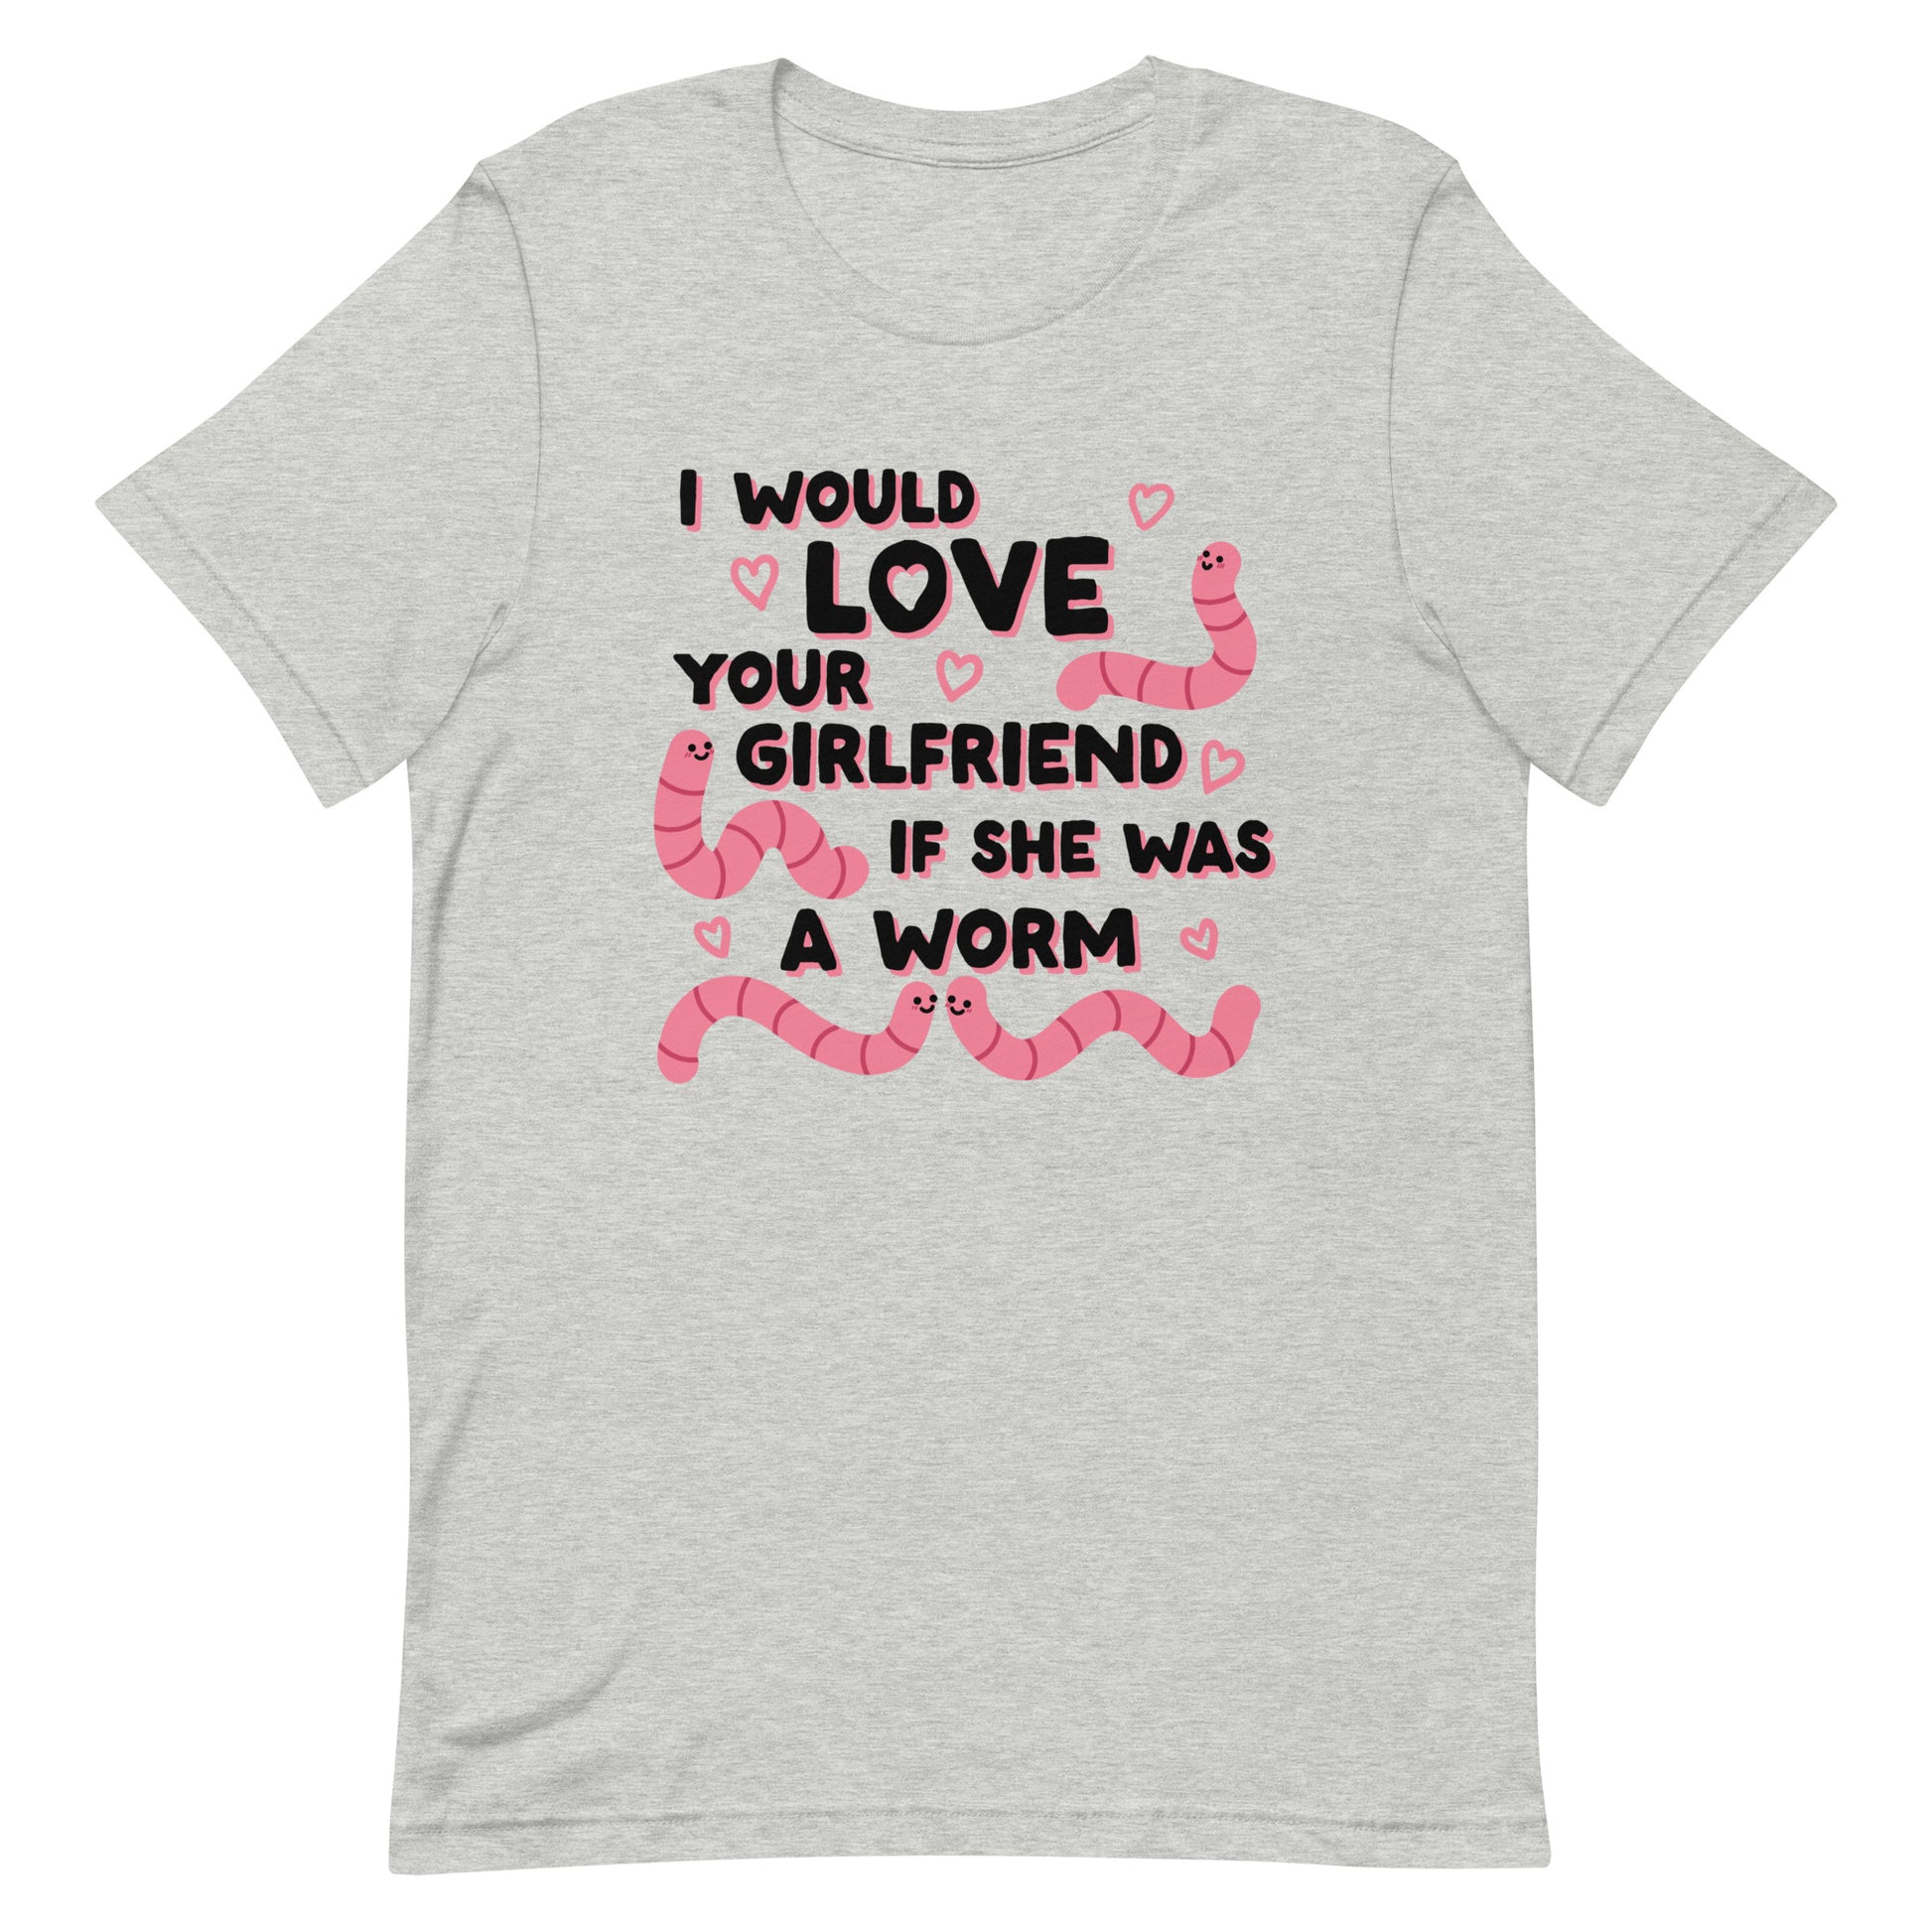 A grey crewneck t-shirt featuring text that reads "I would love your girlfriend if she was a worm". Cute cartoon worms and hearts surround the text.